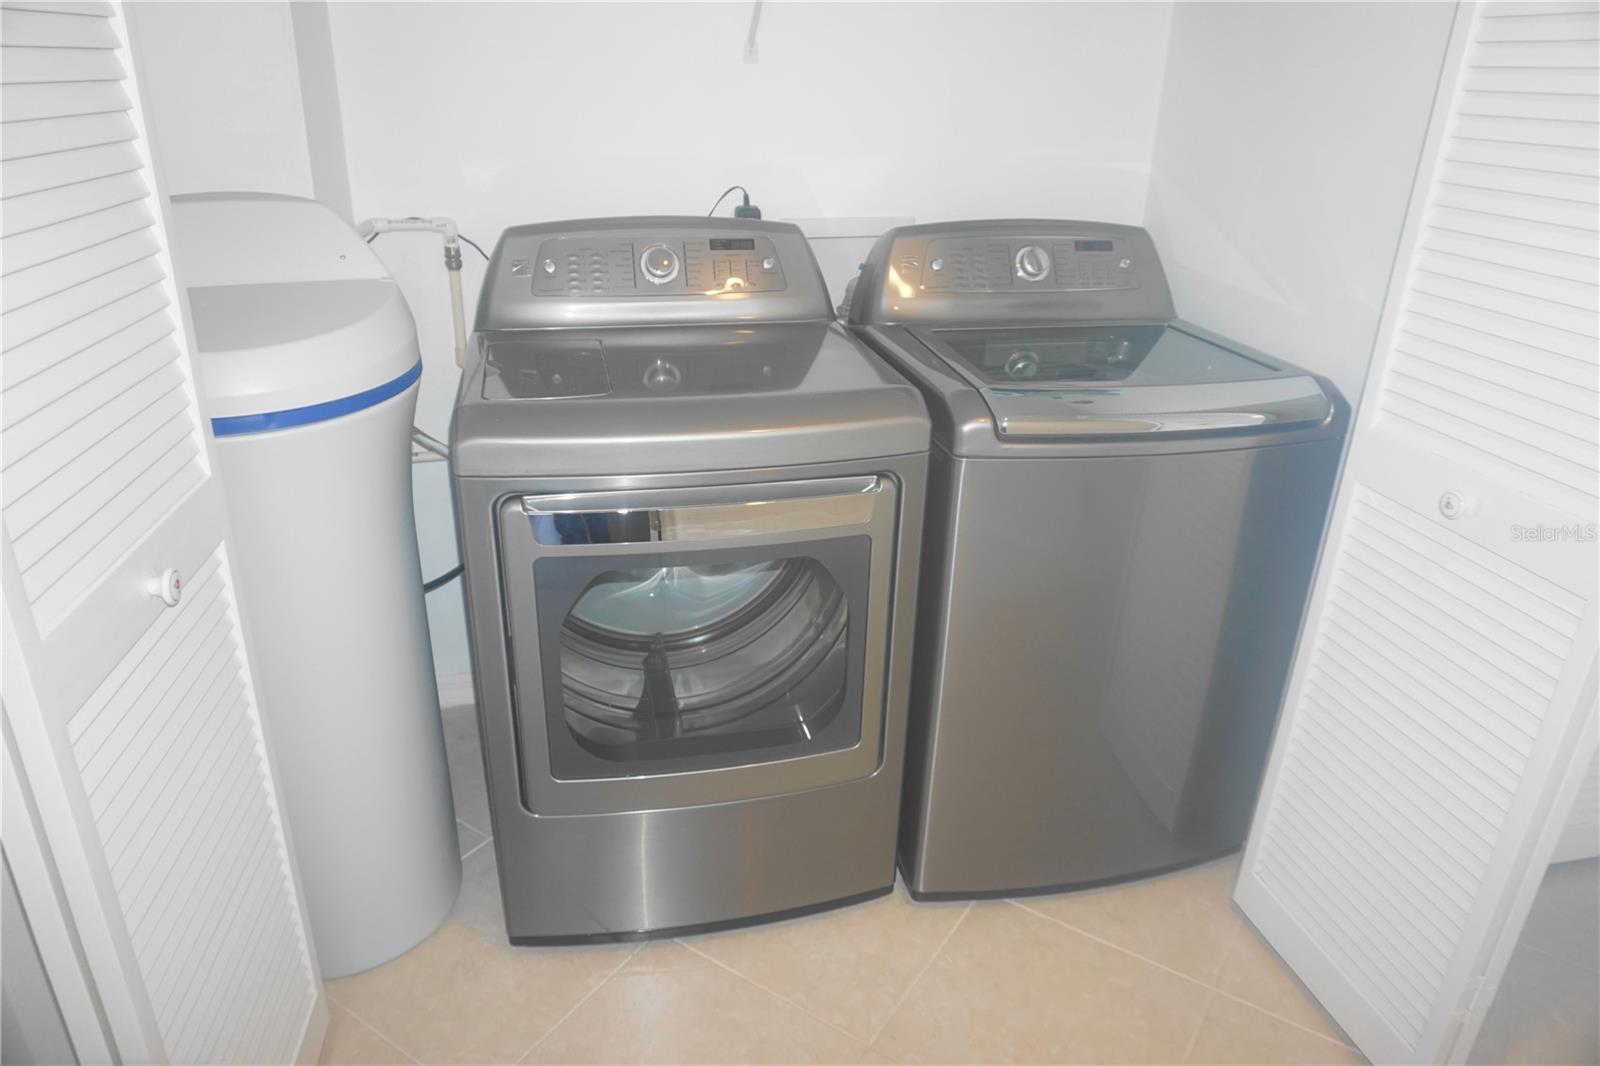 The washer & dryer and water softener